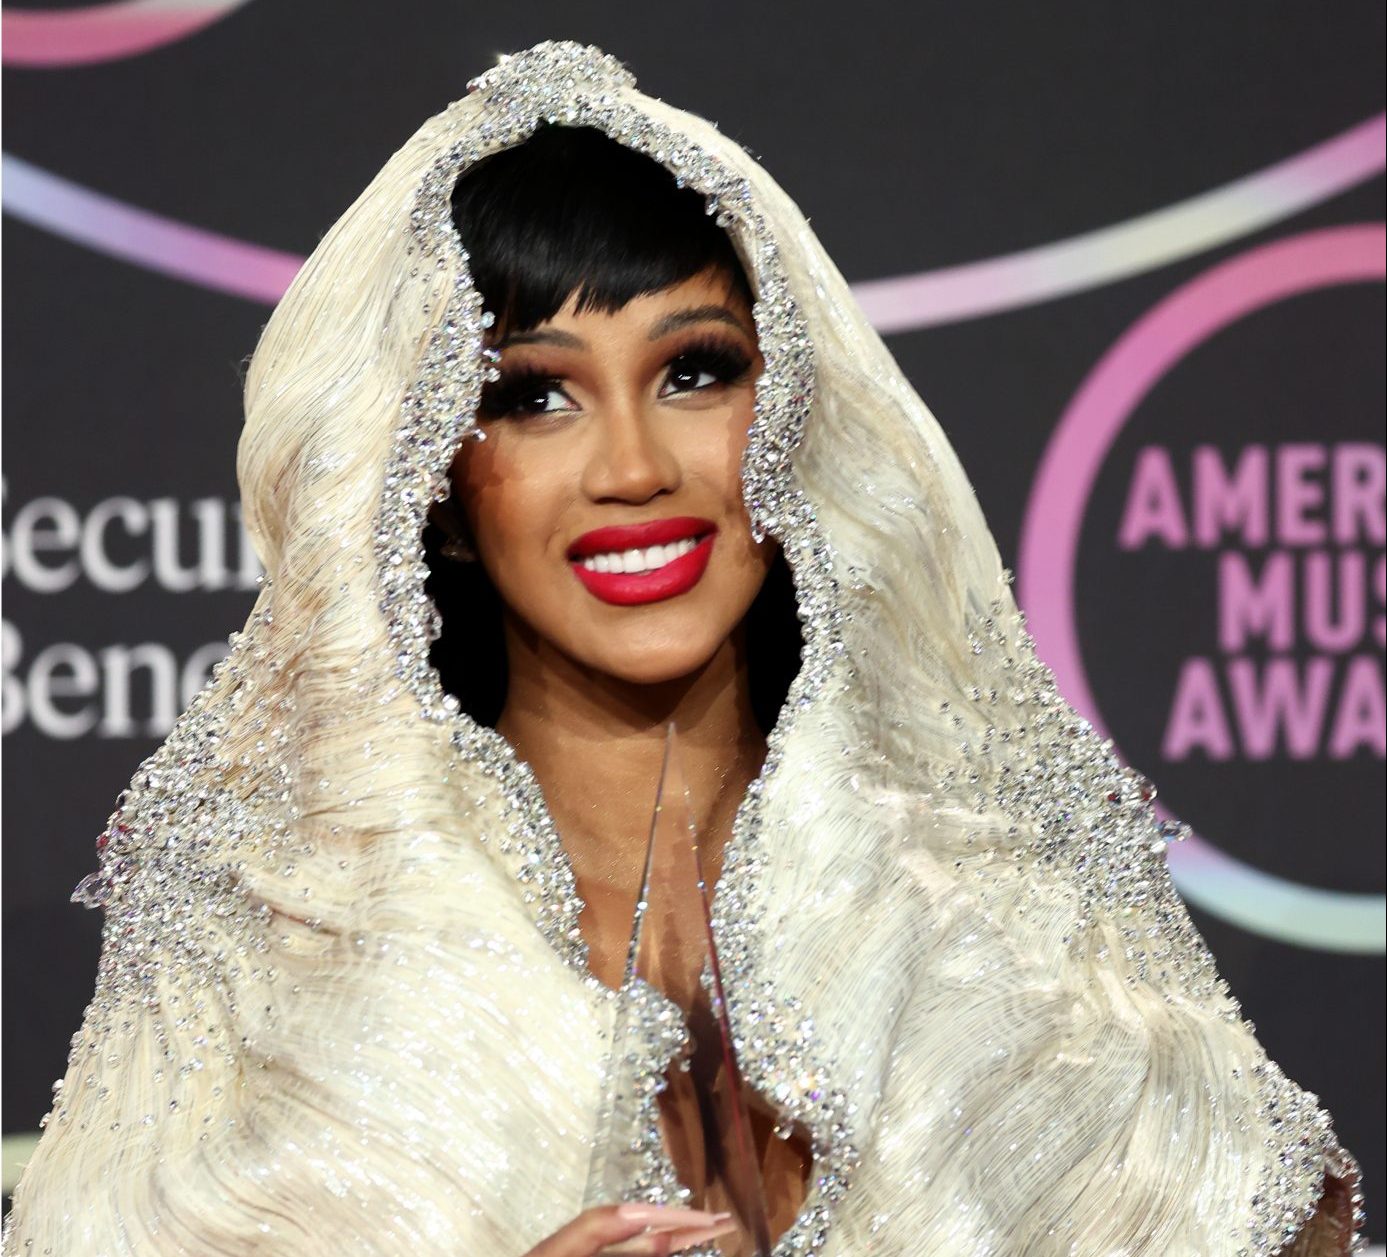 Cardi B Speaks On Colorism In NYC Strip Clubs Following Joe Budden’s Recent Comments—“Certain Clubs Wouldn’t Let Me Work”